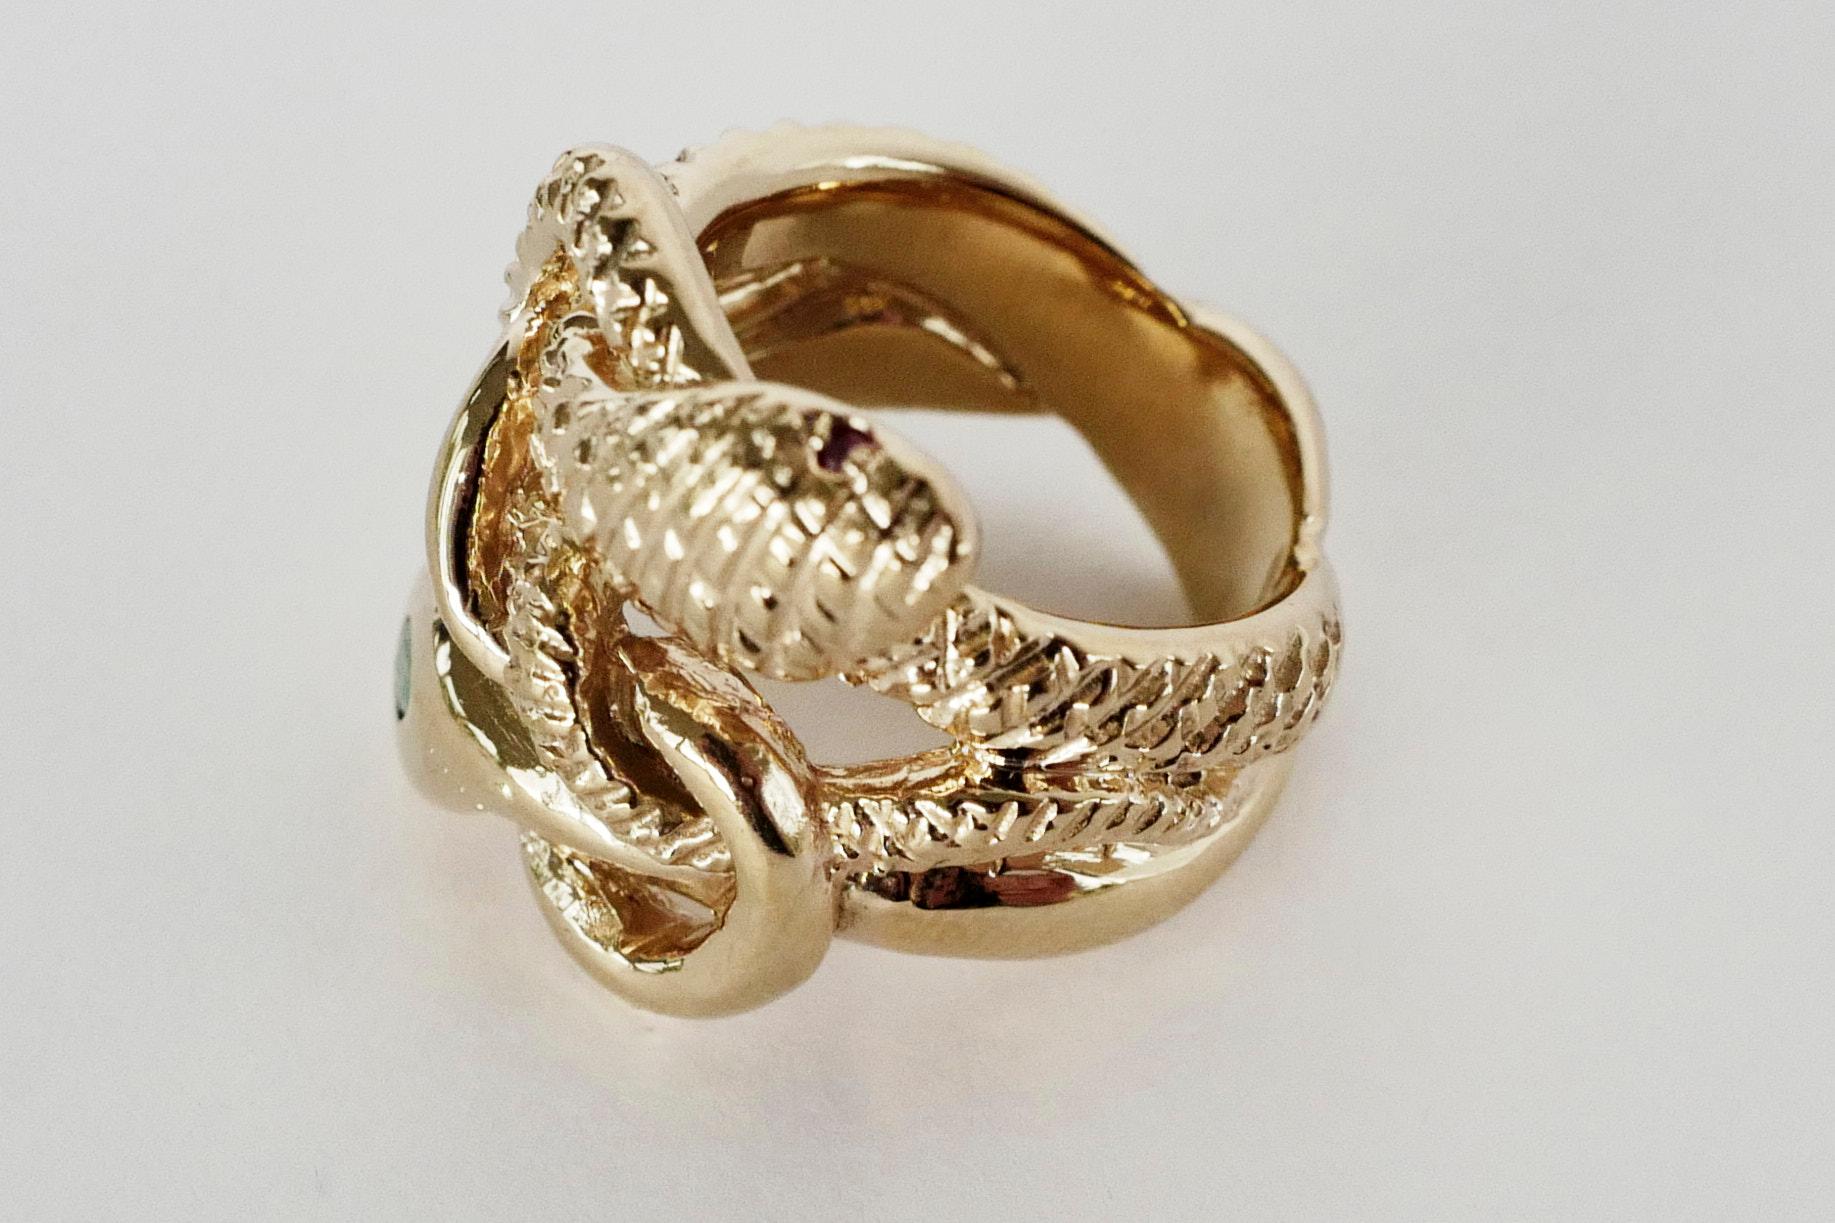 Snake Ring Gold Vermeil Emerald White Diamond Ruby Victorian Style J Dauphin For Sale 1